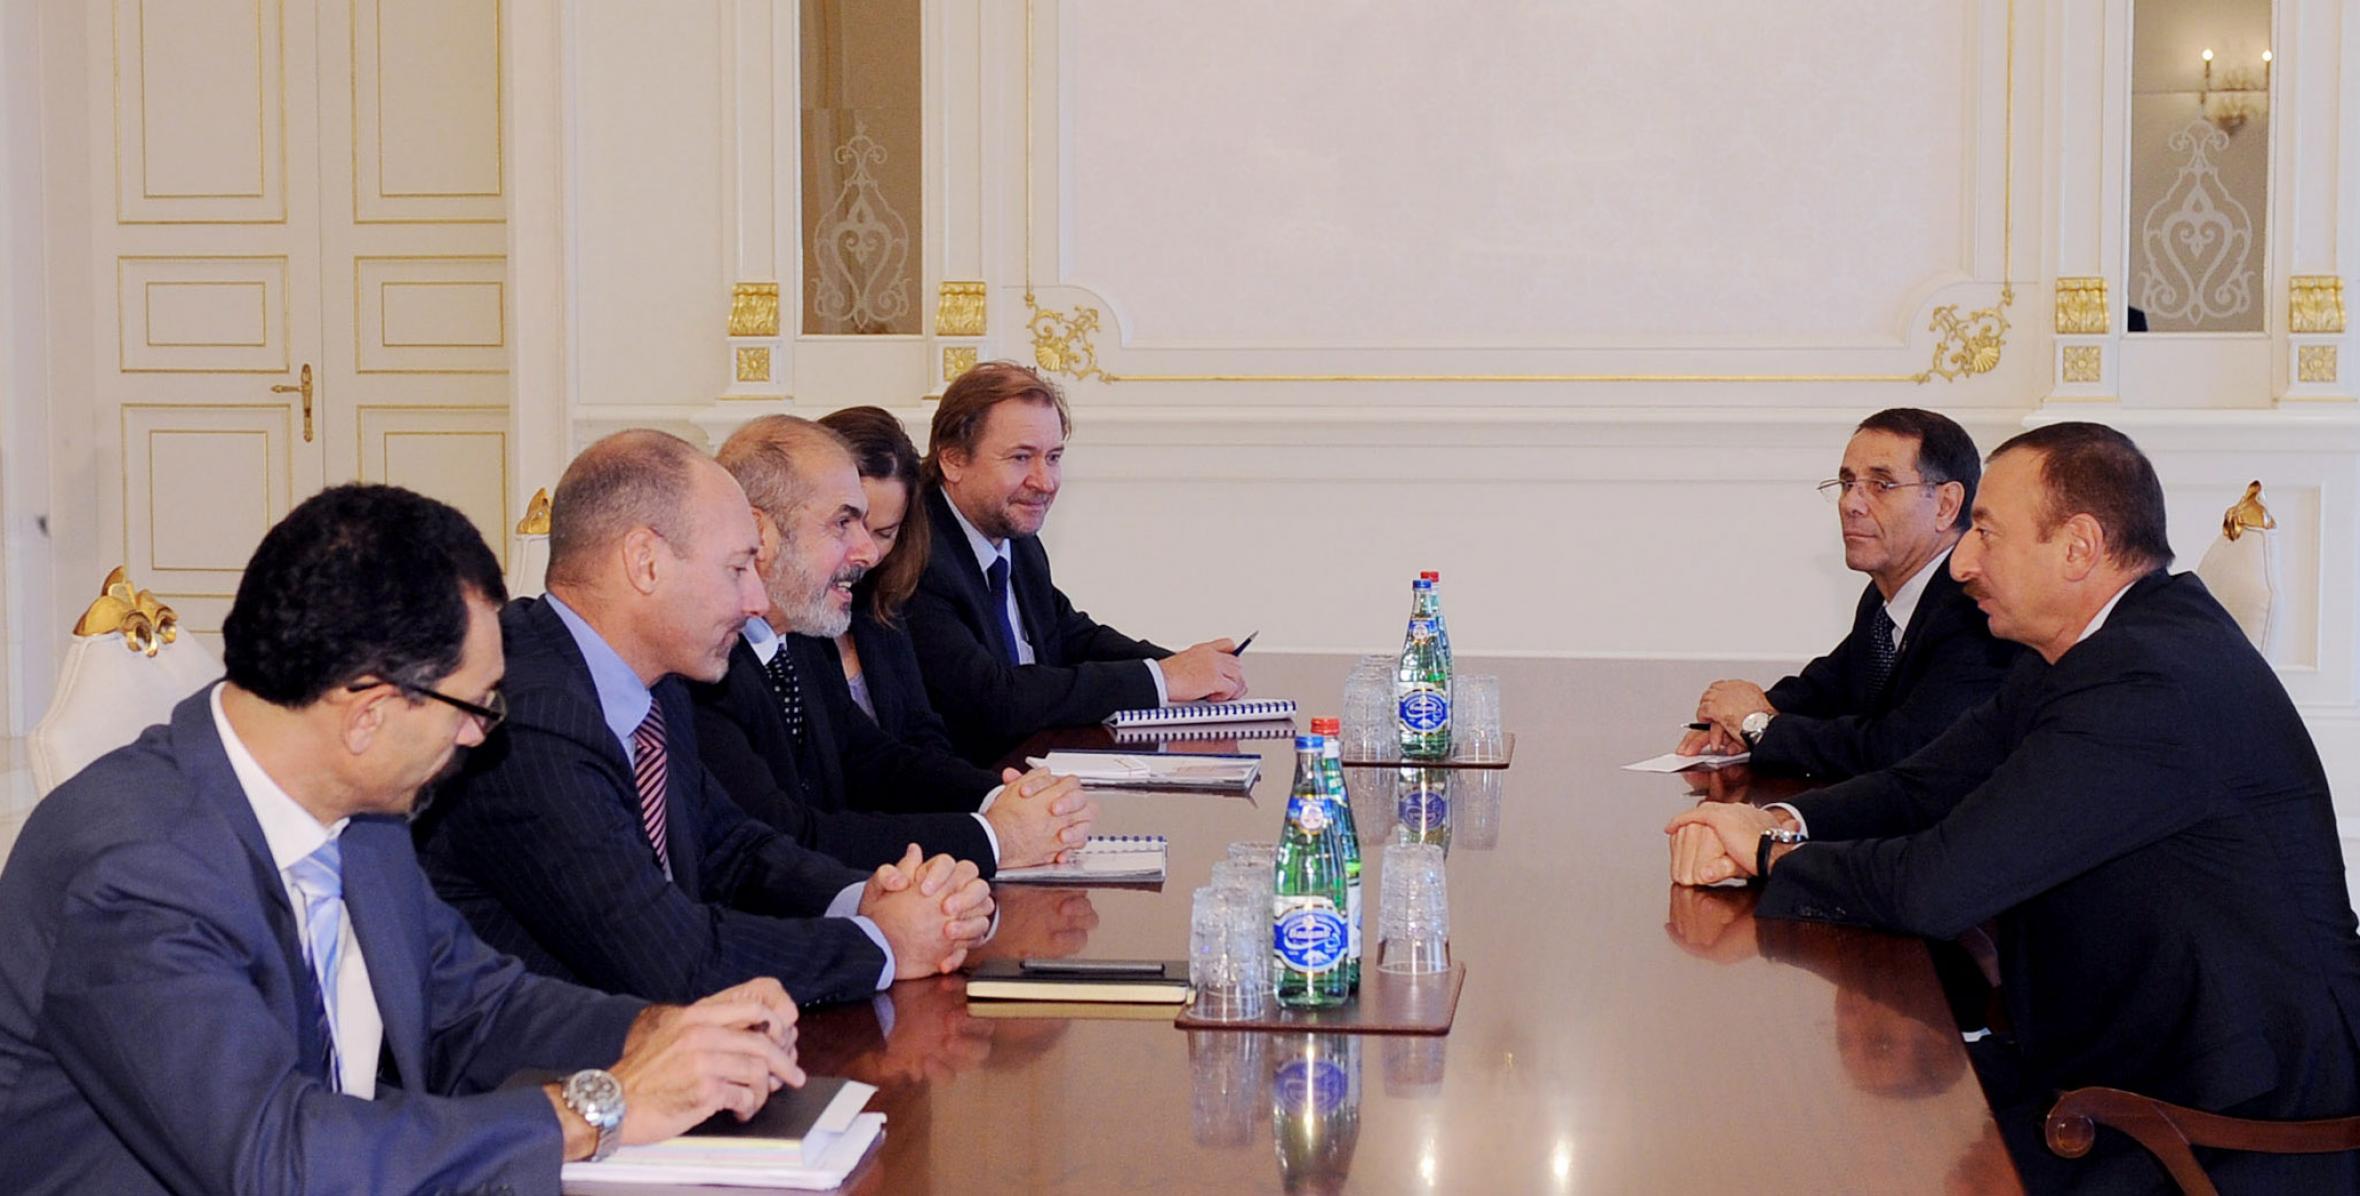 Ilham Aliyev received a delegation led by the European Union Special Representative for the South Caucasus, Philippe Lefort